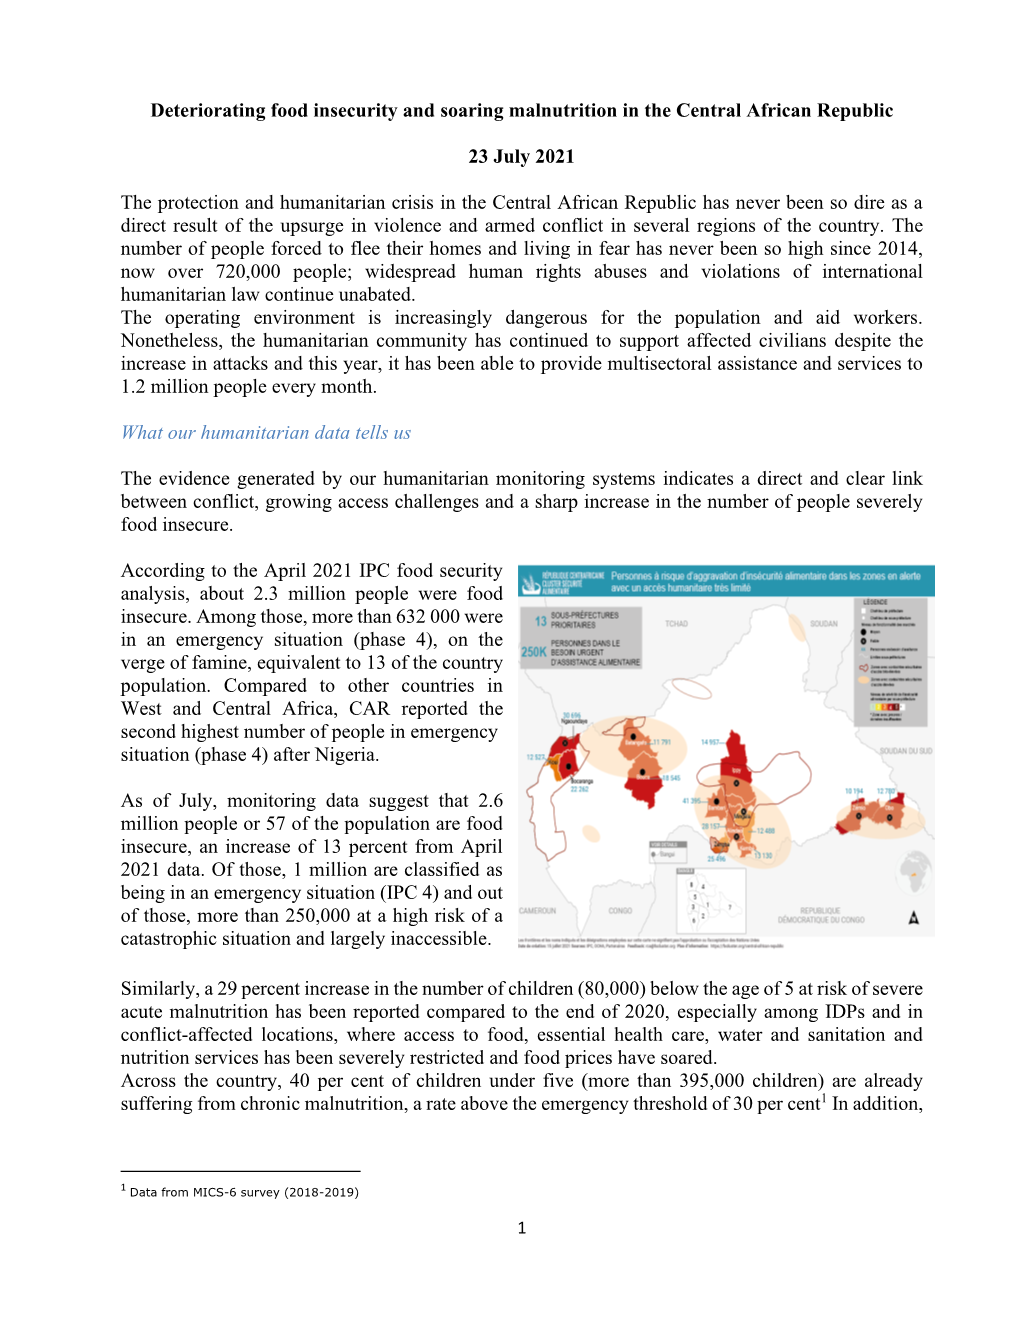 Deteriorating Food Insecurity and Soaring Malnutrition in the Central African Republic